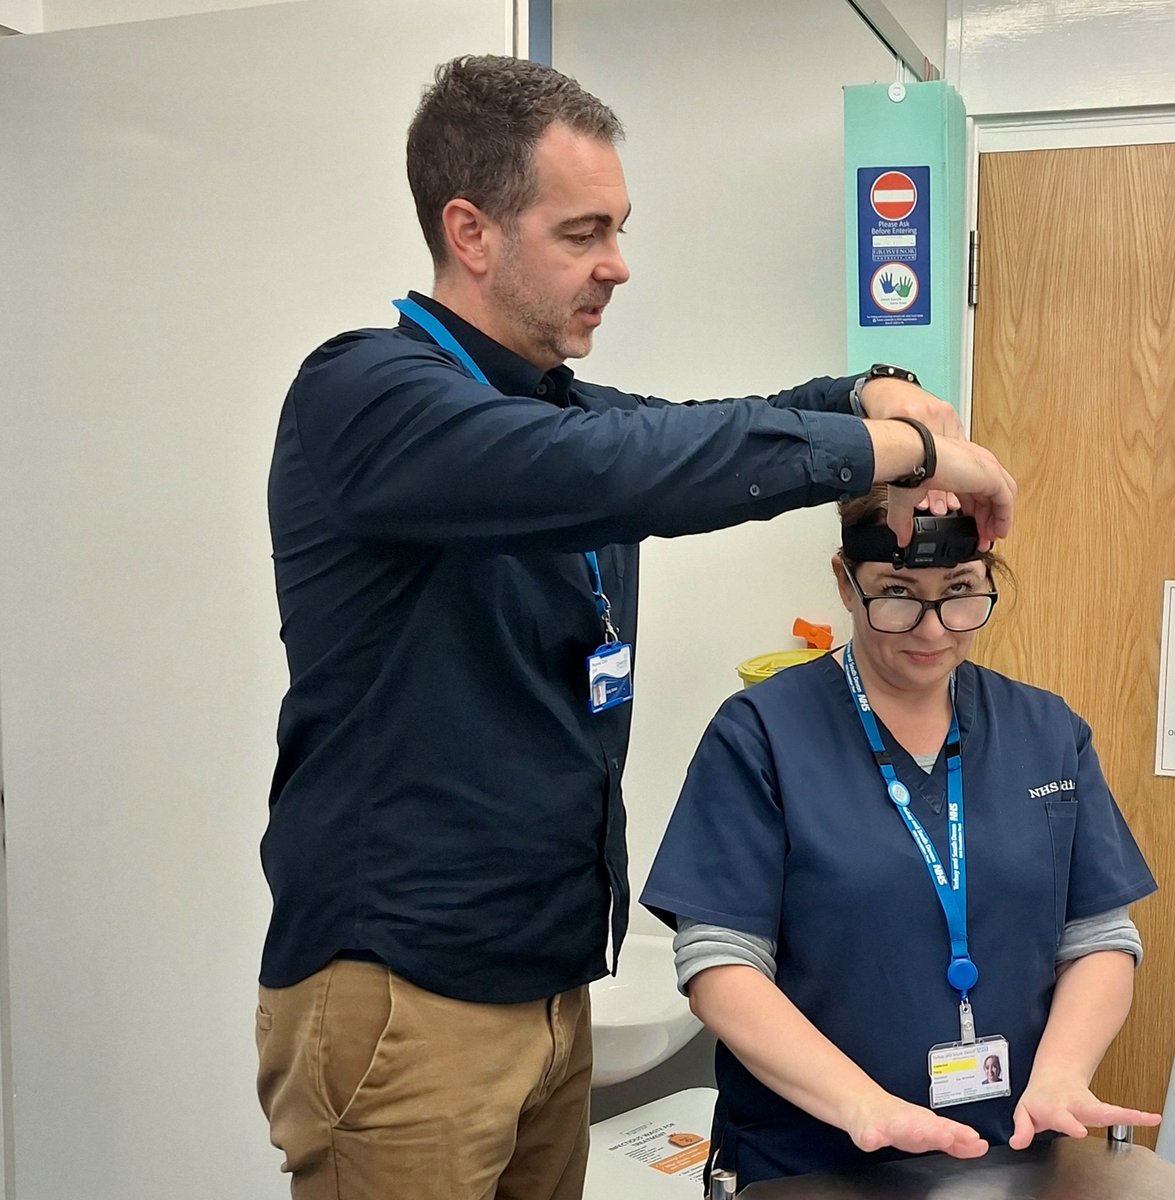 Getting ready for filming of a foot wound for @CovUniSim @MaryEBurton @KimStuartOT @AndyWinter7t8 and the return to practice course. Thank you to all the AHPs, support workers and apprentices who helped make this possible @TSDFT_AHPs @TSDFT_Pods #orthoptics #Trads